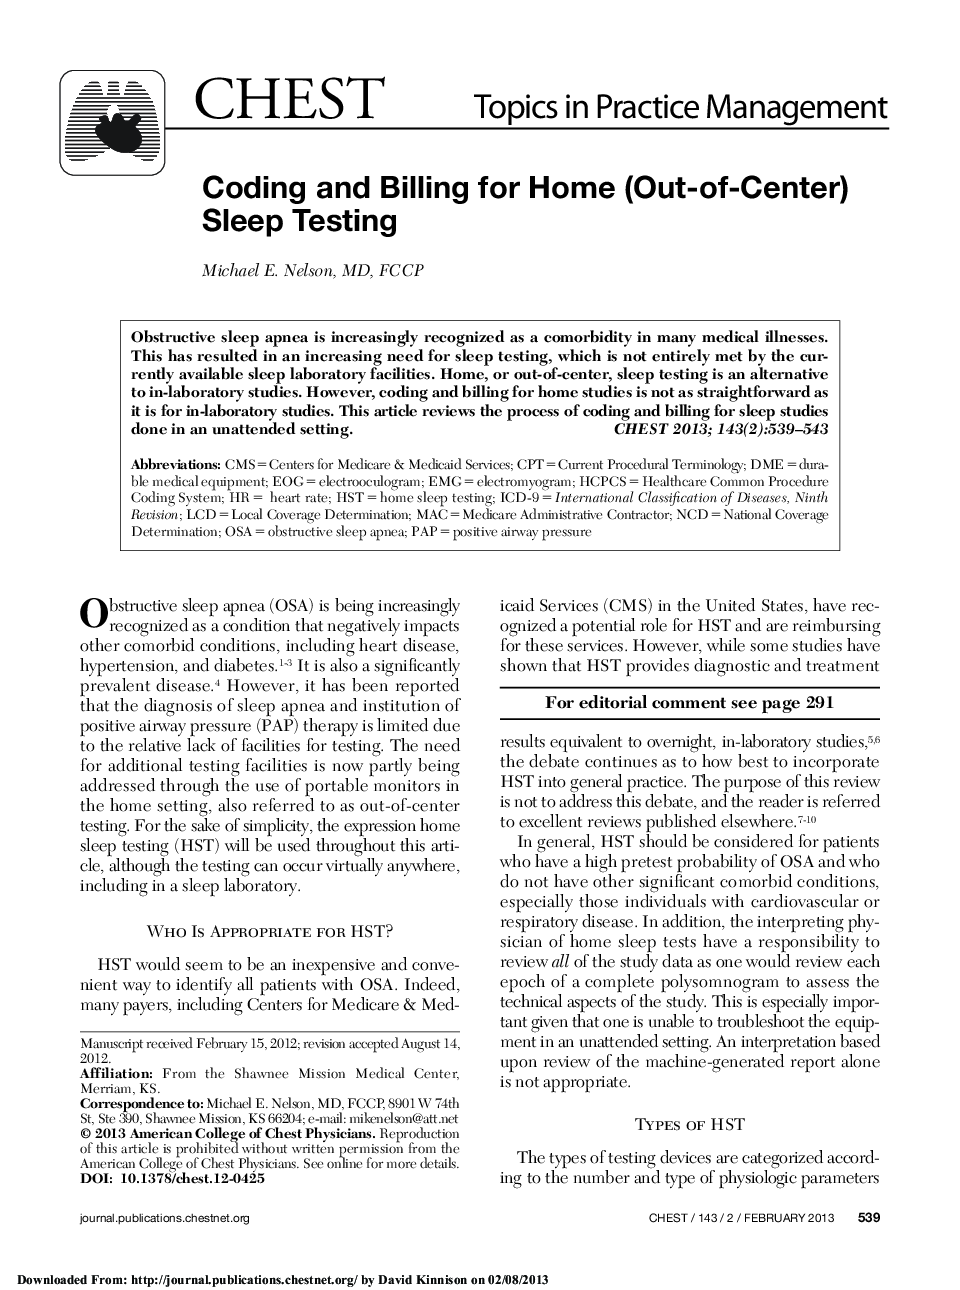 Coding and Billing for Home (Out-of-Center) Sleep Testing